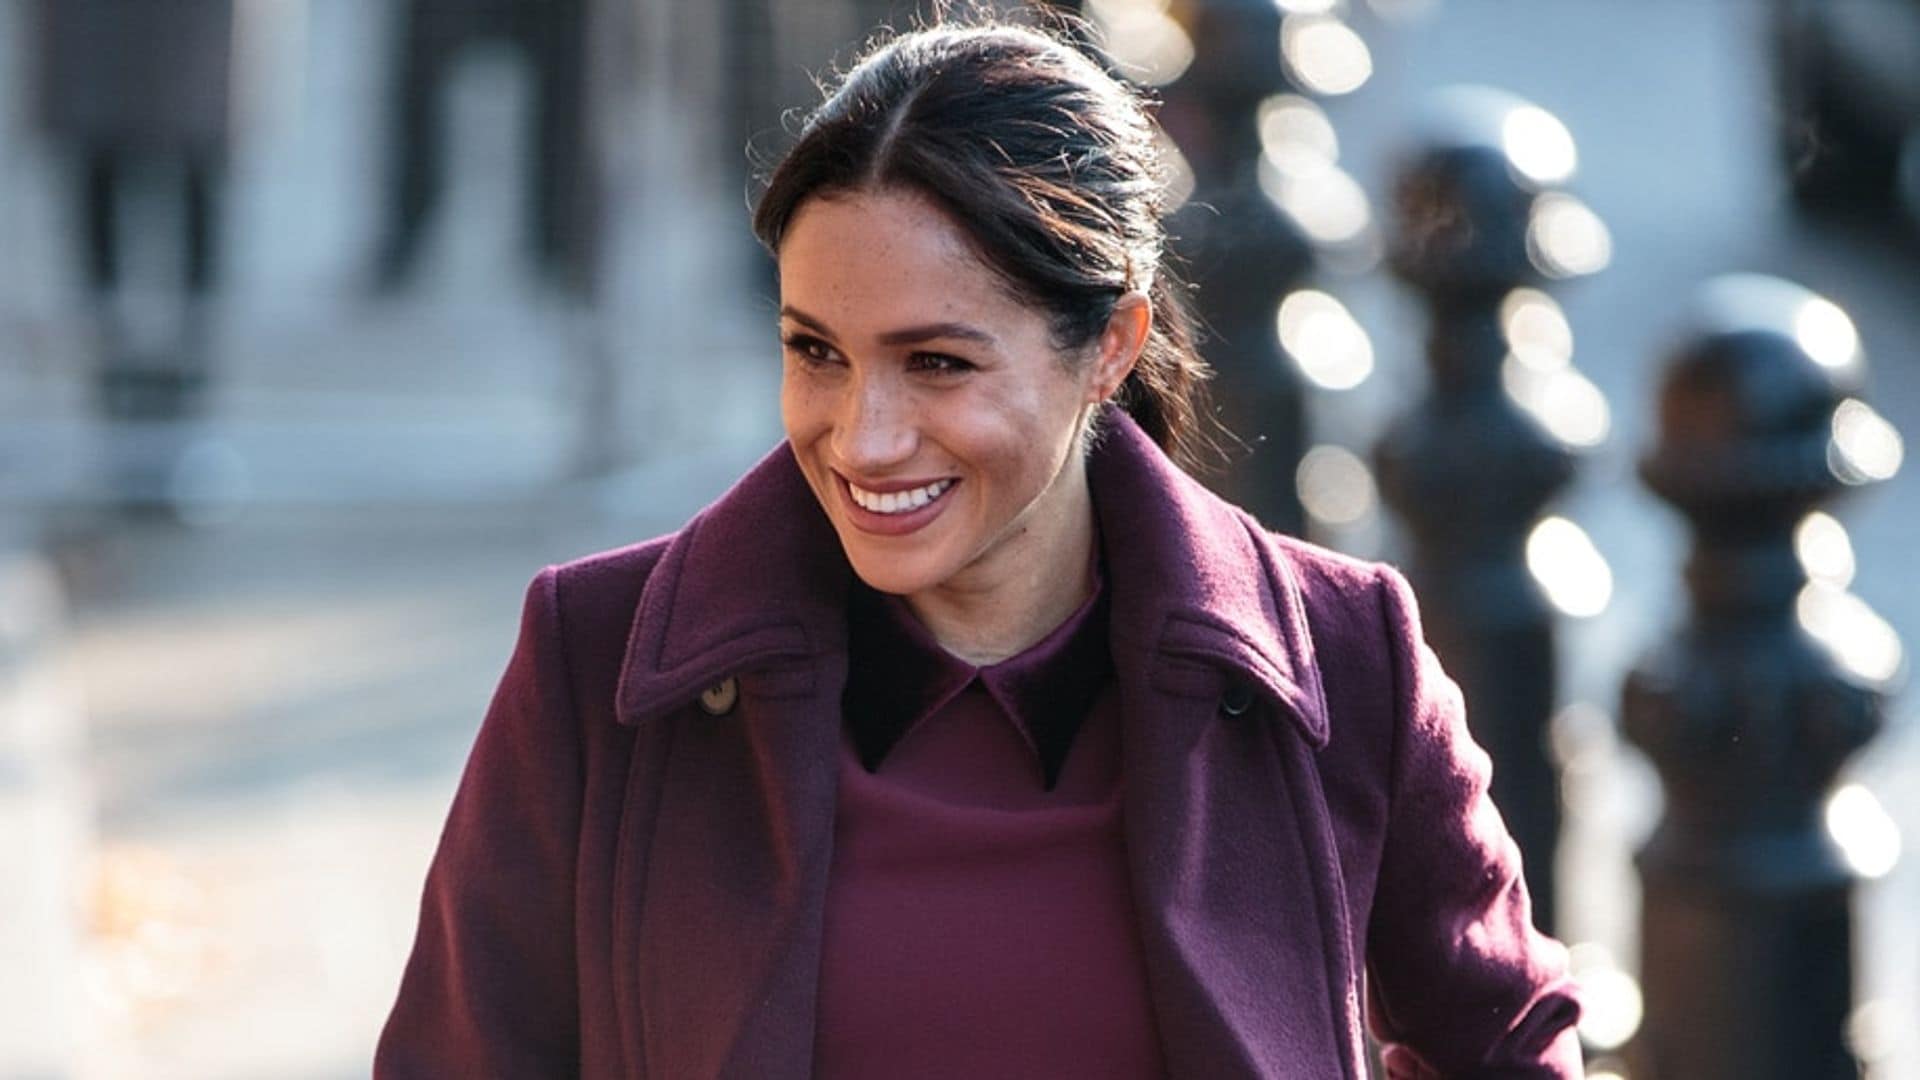 Meghan Markle makes surprise trip to the US without Harry or baby Archie